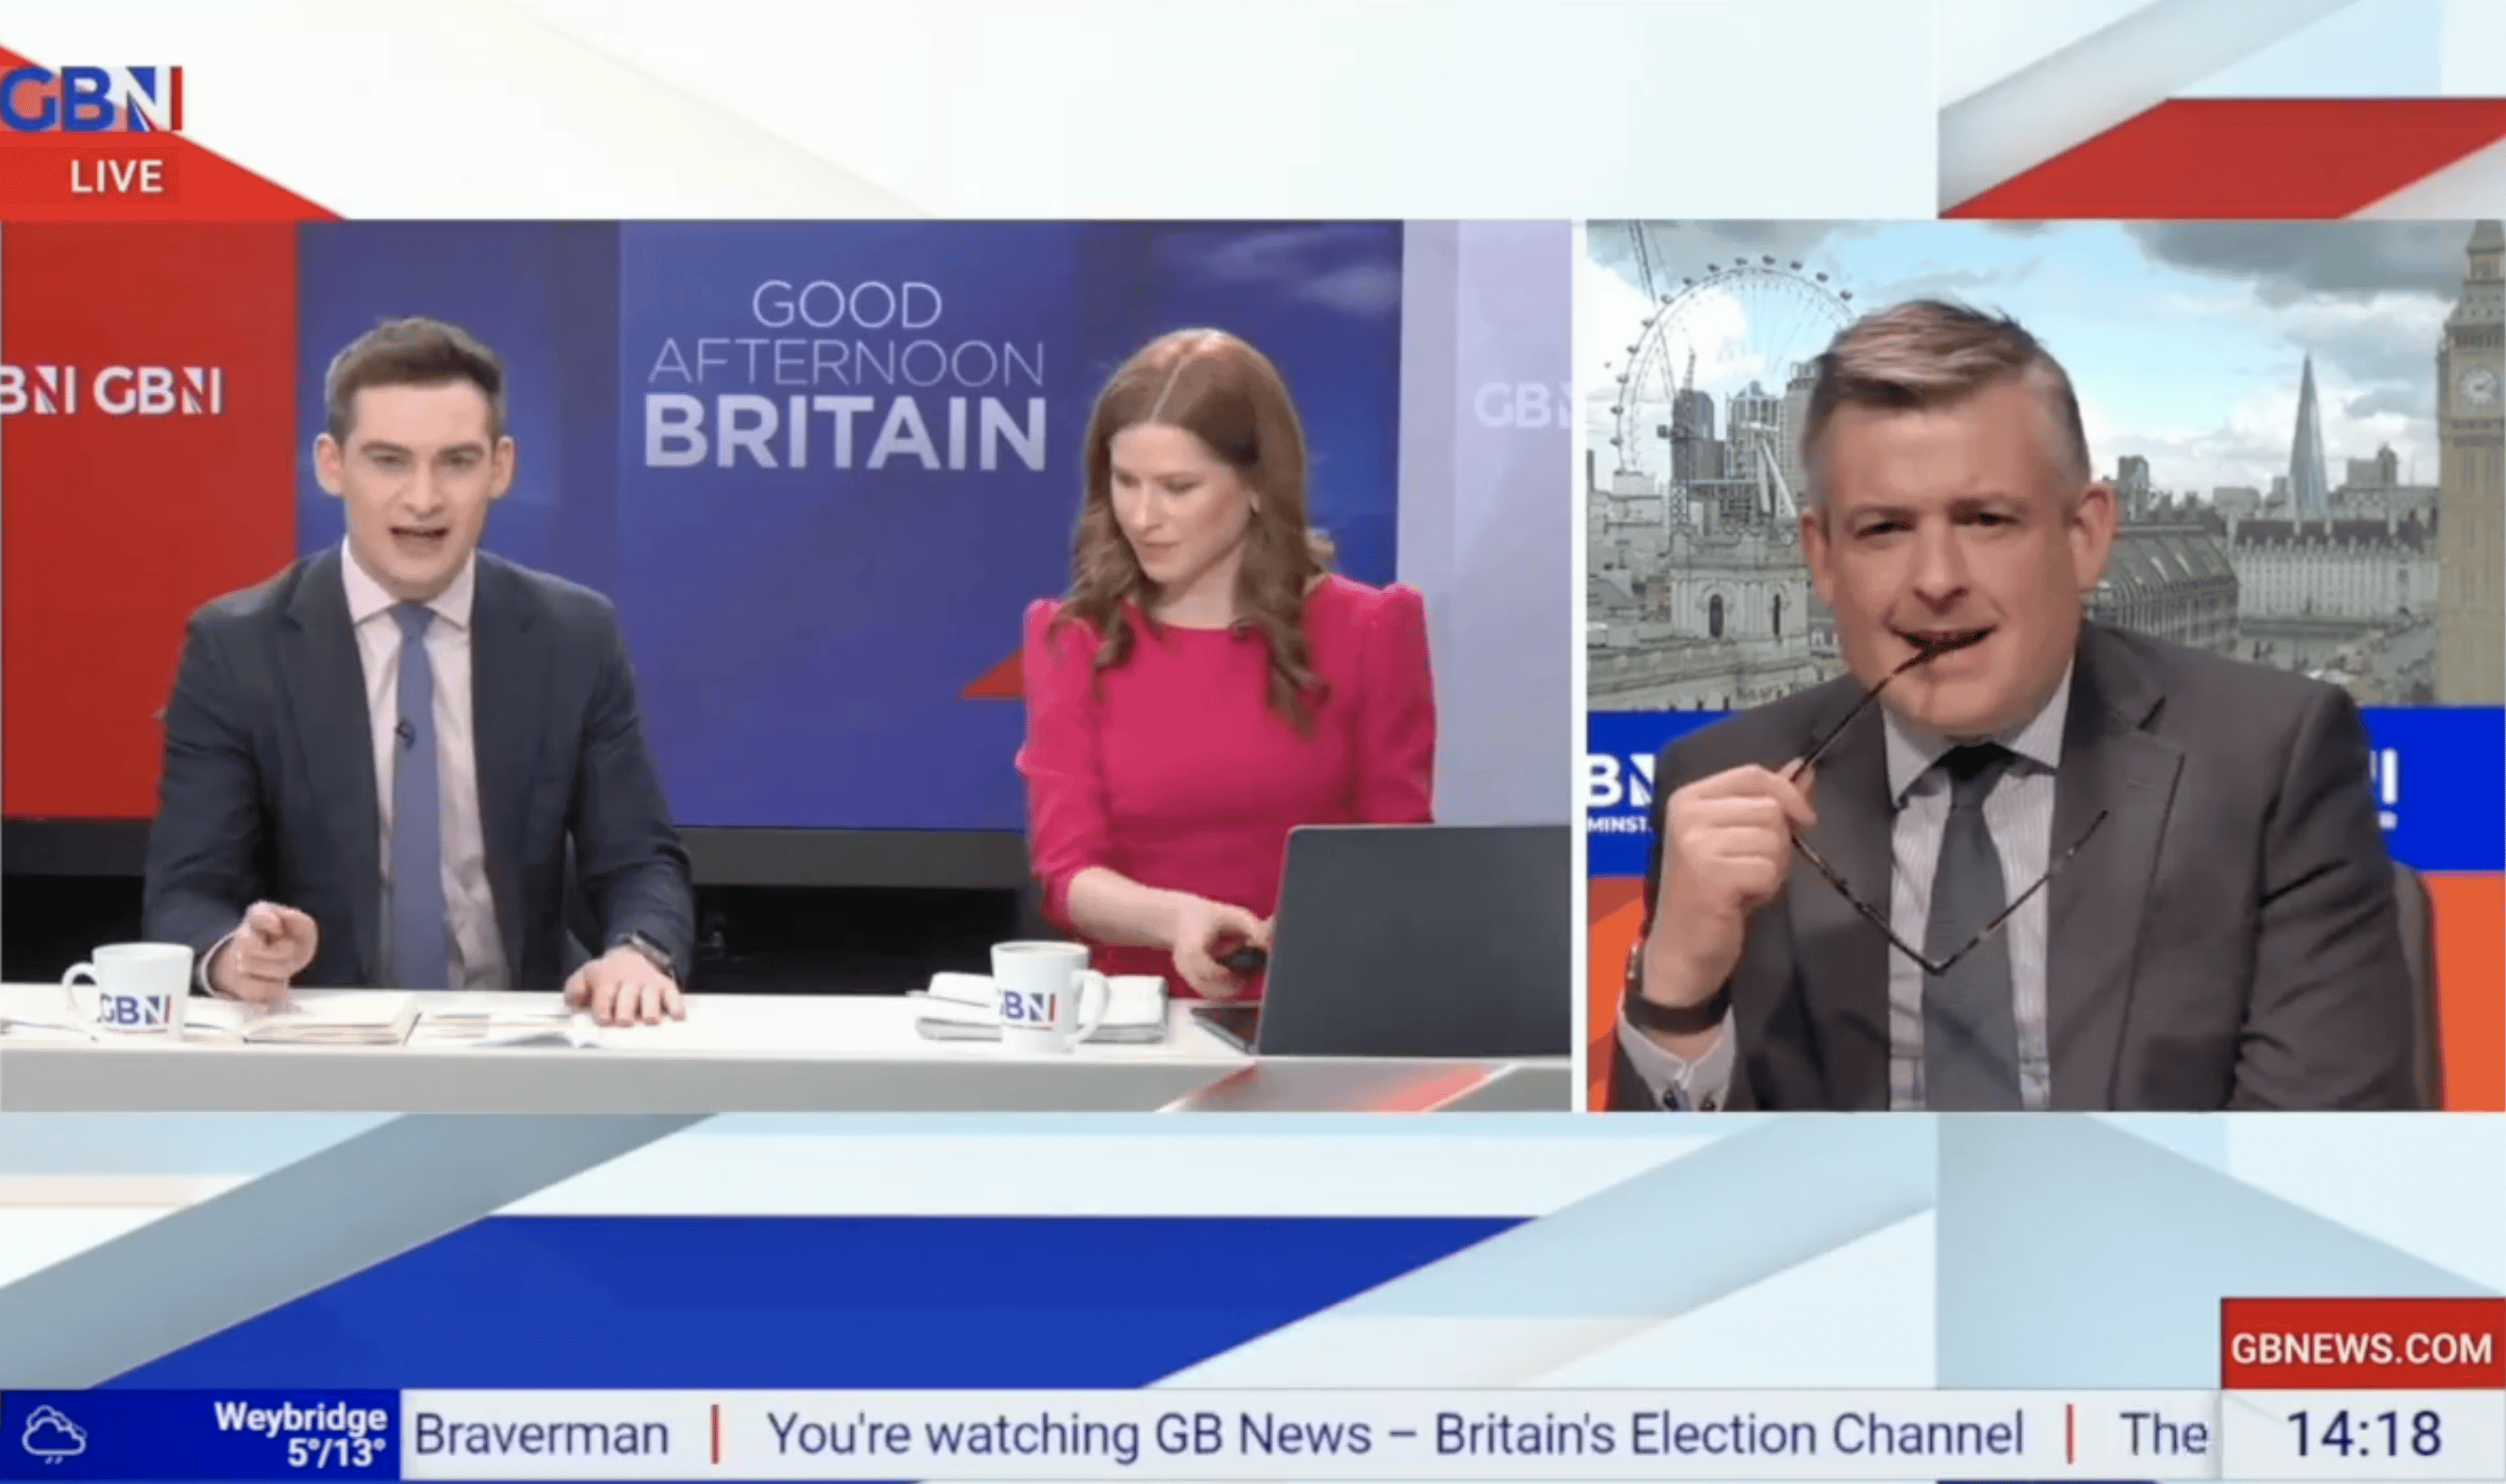 GB News hosts get gloriously shut down by Jonathan Ashworth over NatCon event